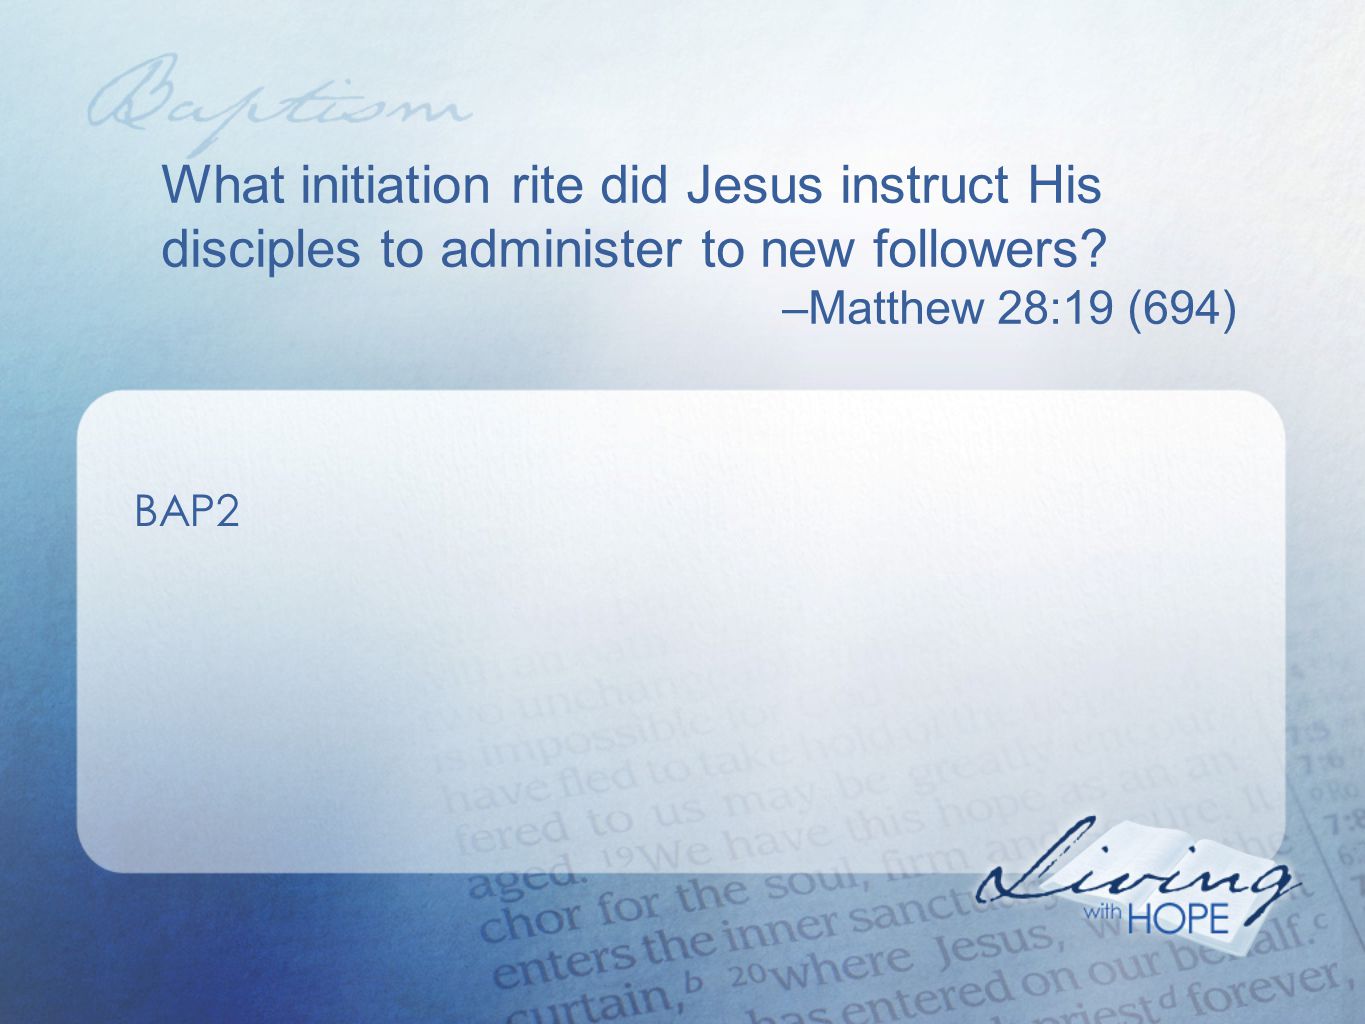 What initiation rite did Jesus instruct His disciples to administer to new followers.